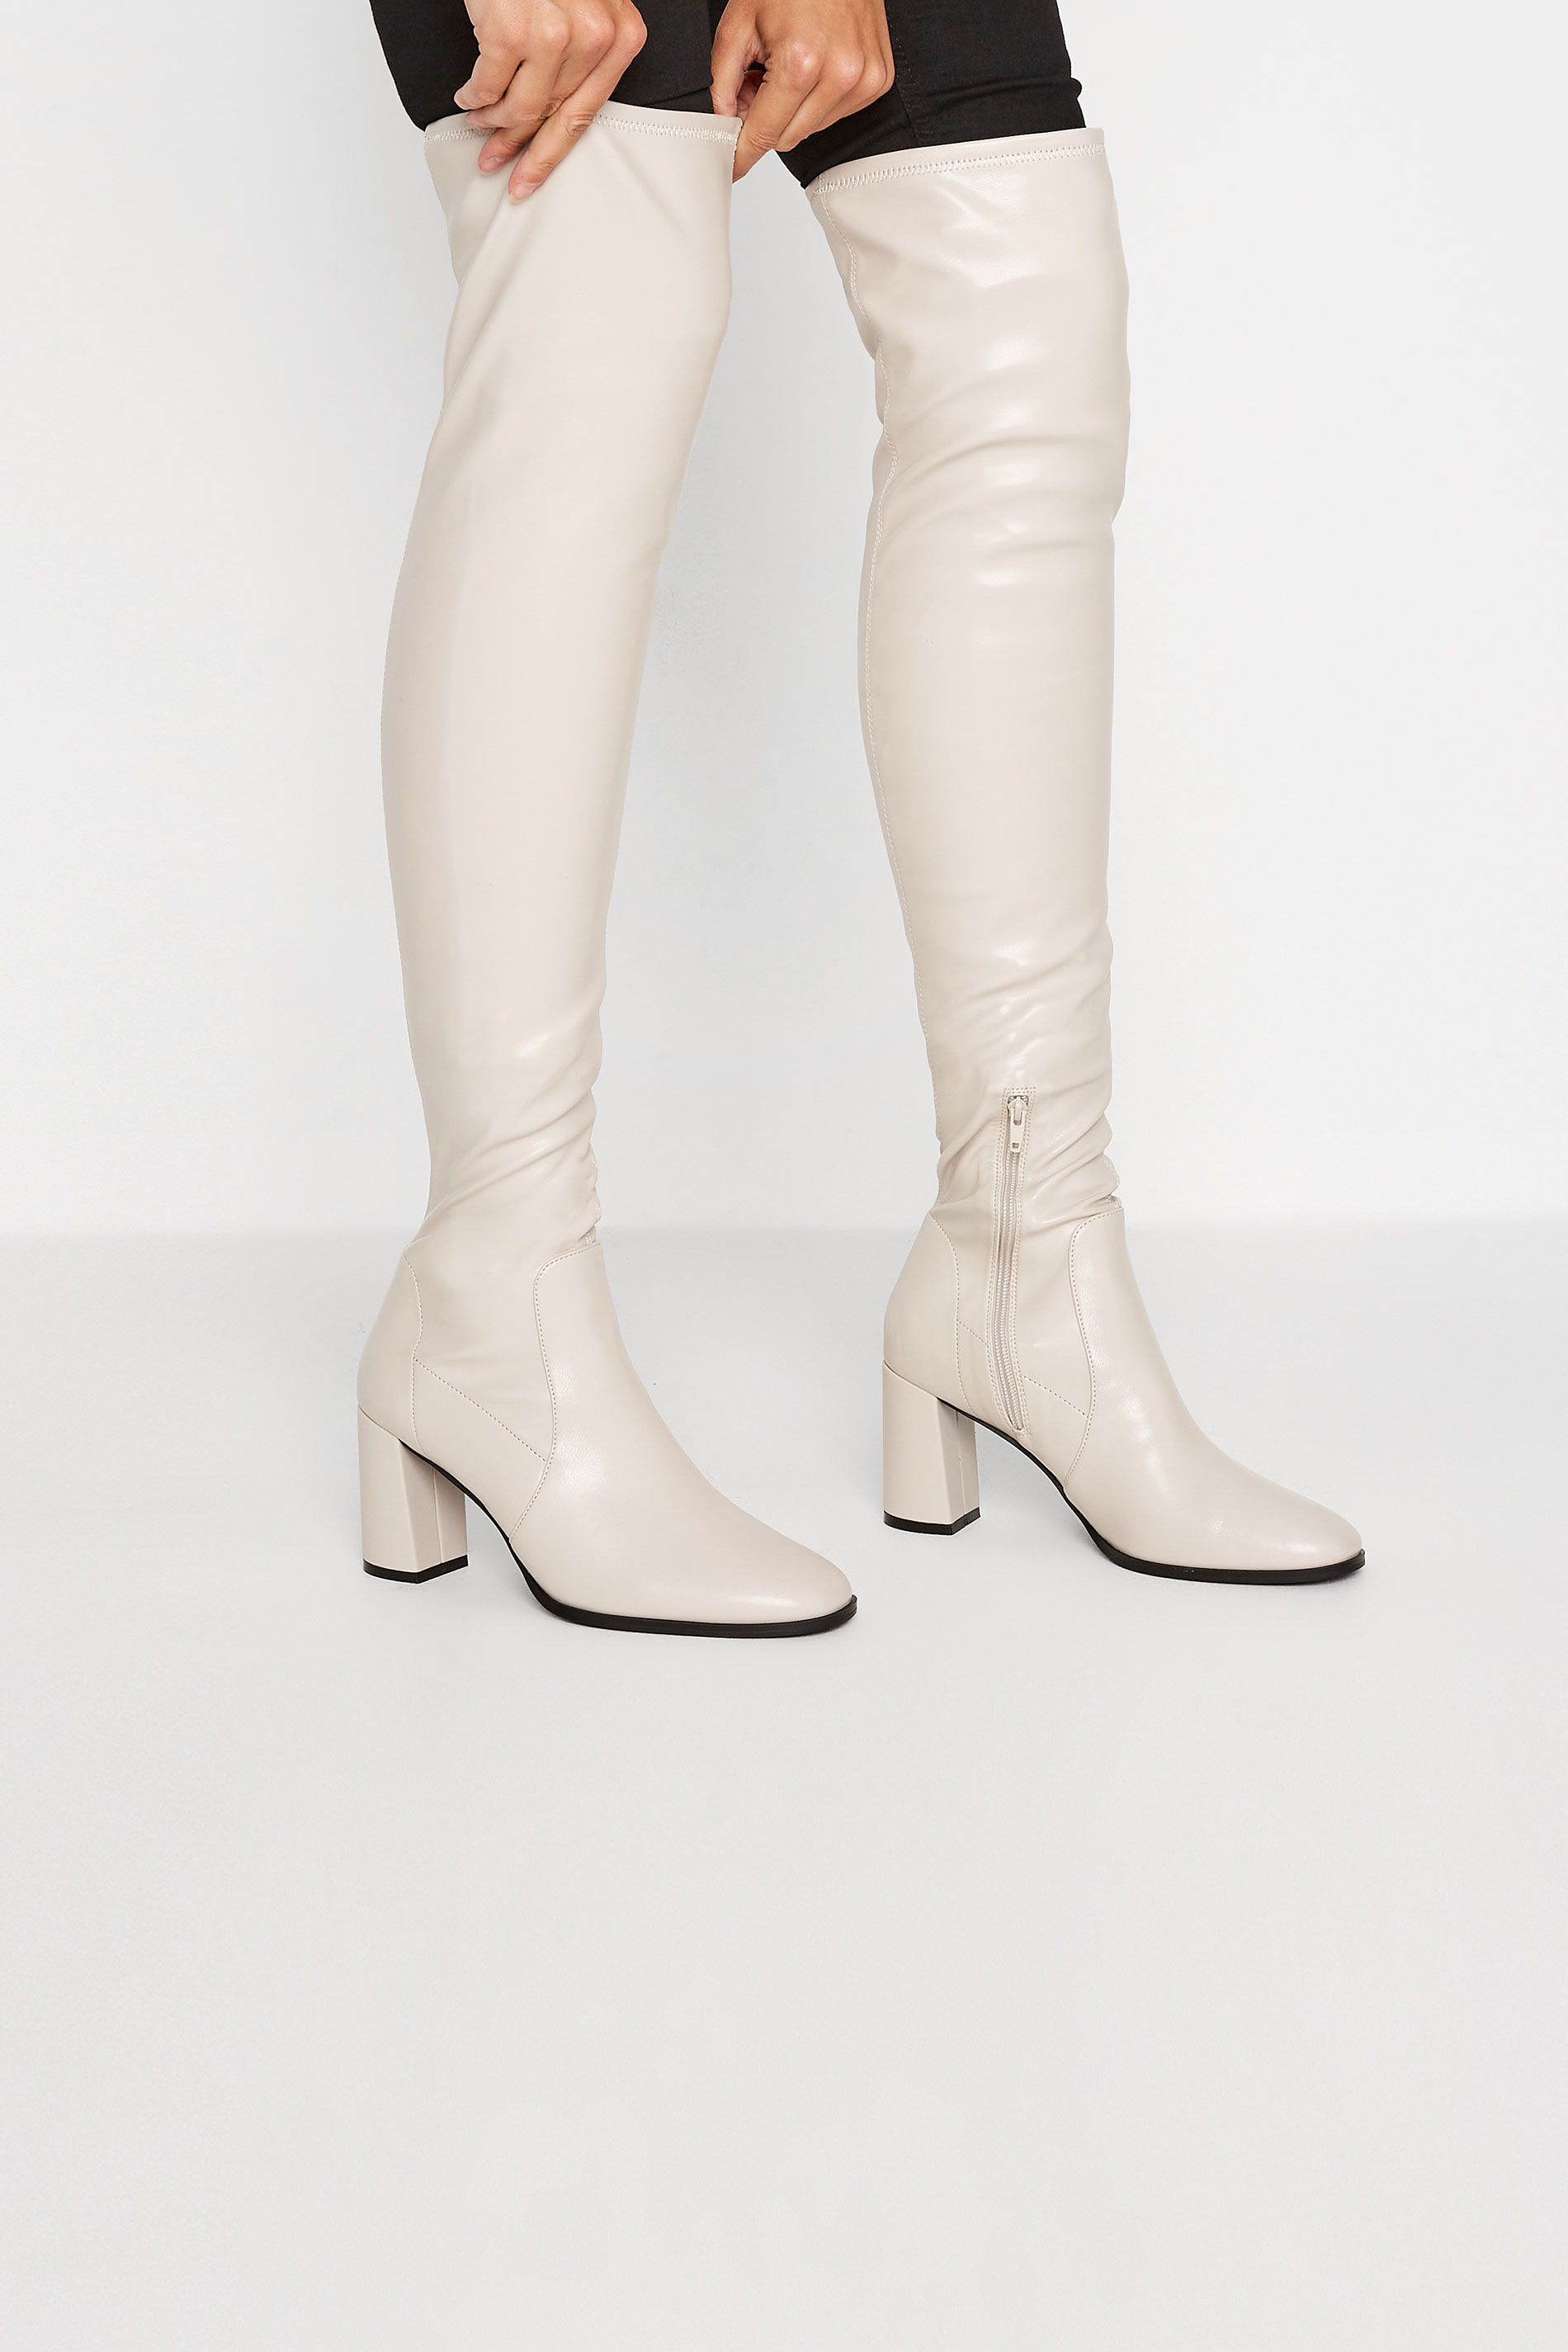 LTS Cream Heeled Over The Knee Boots In Standard D Fit 1